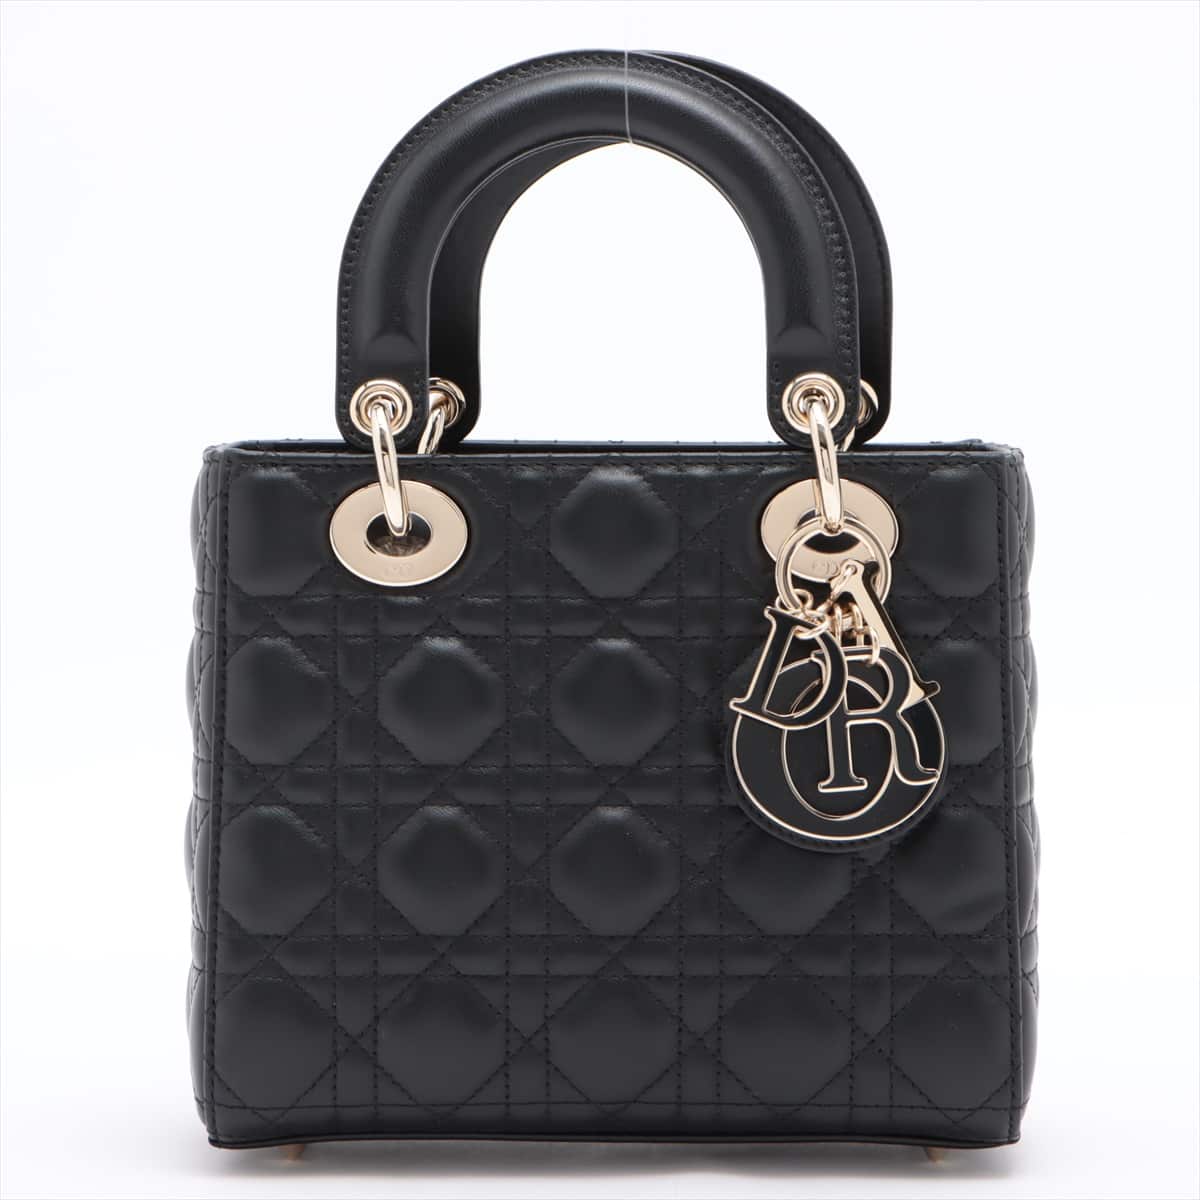 Christian Dior My Lady Dior Cannage Leather 2way handbag Black With initial charms